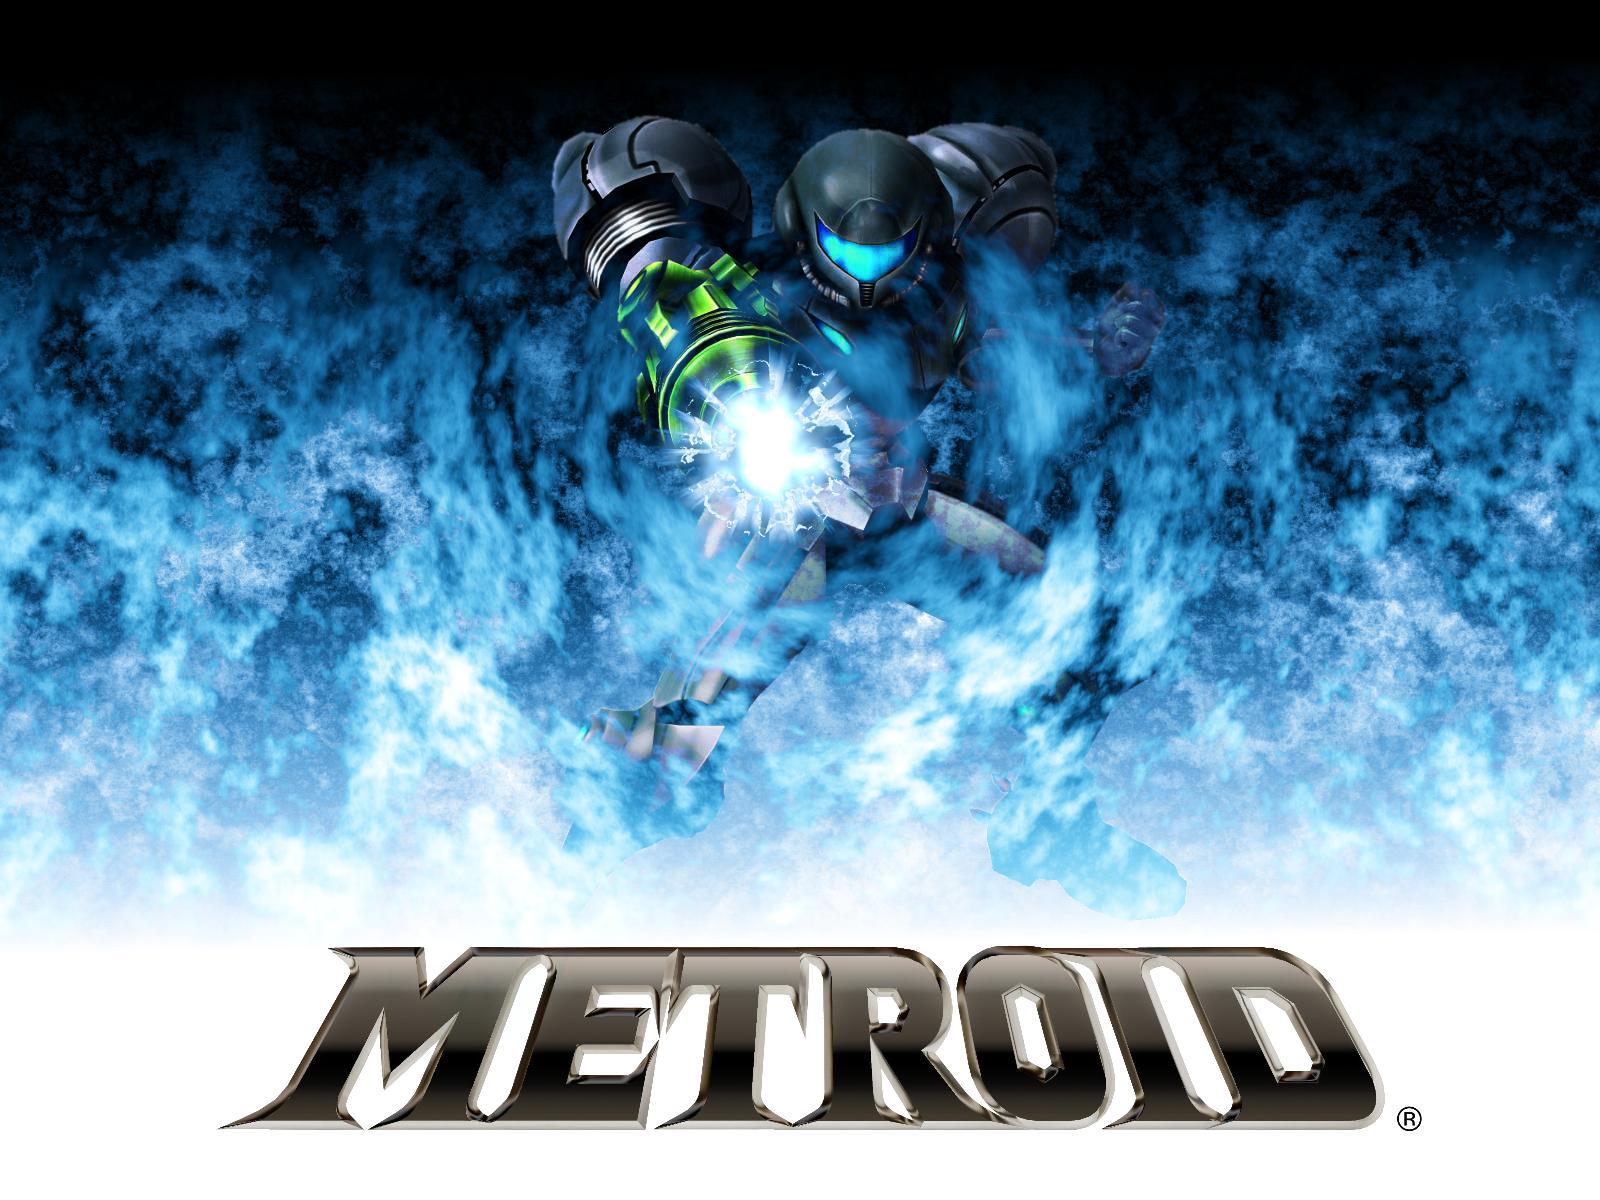 Metroid Prime  Echoes by sonofshade